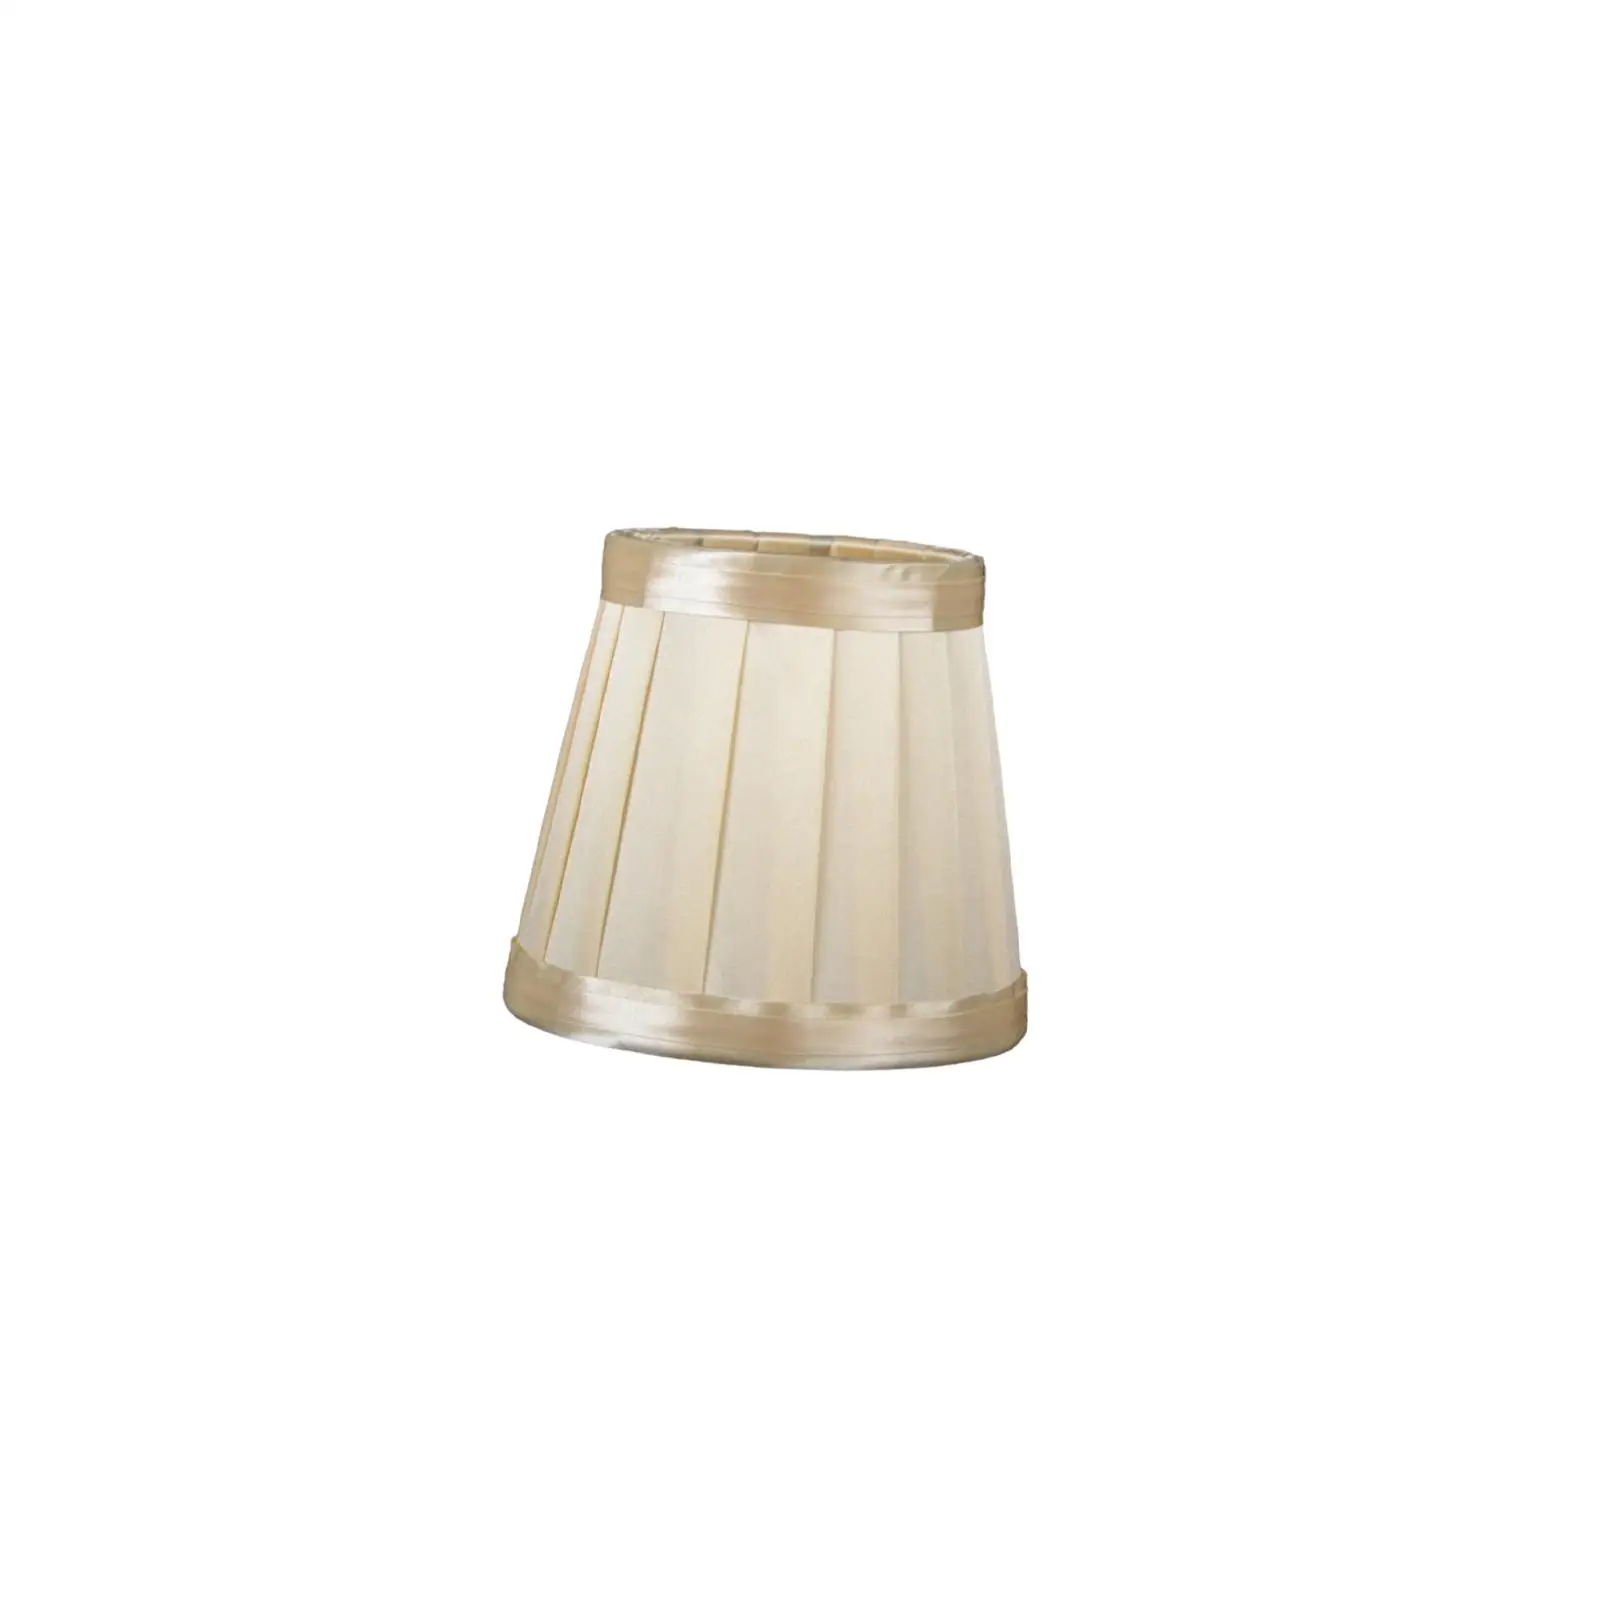 Table Lamp Shade Cover Replacement Cloth Lampshade Easily Install Multifunctional Light Golden Accessories for Living Room